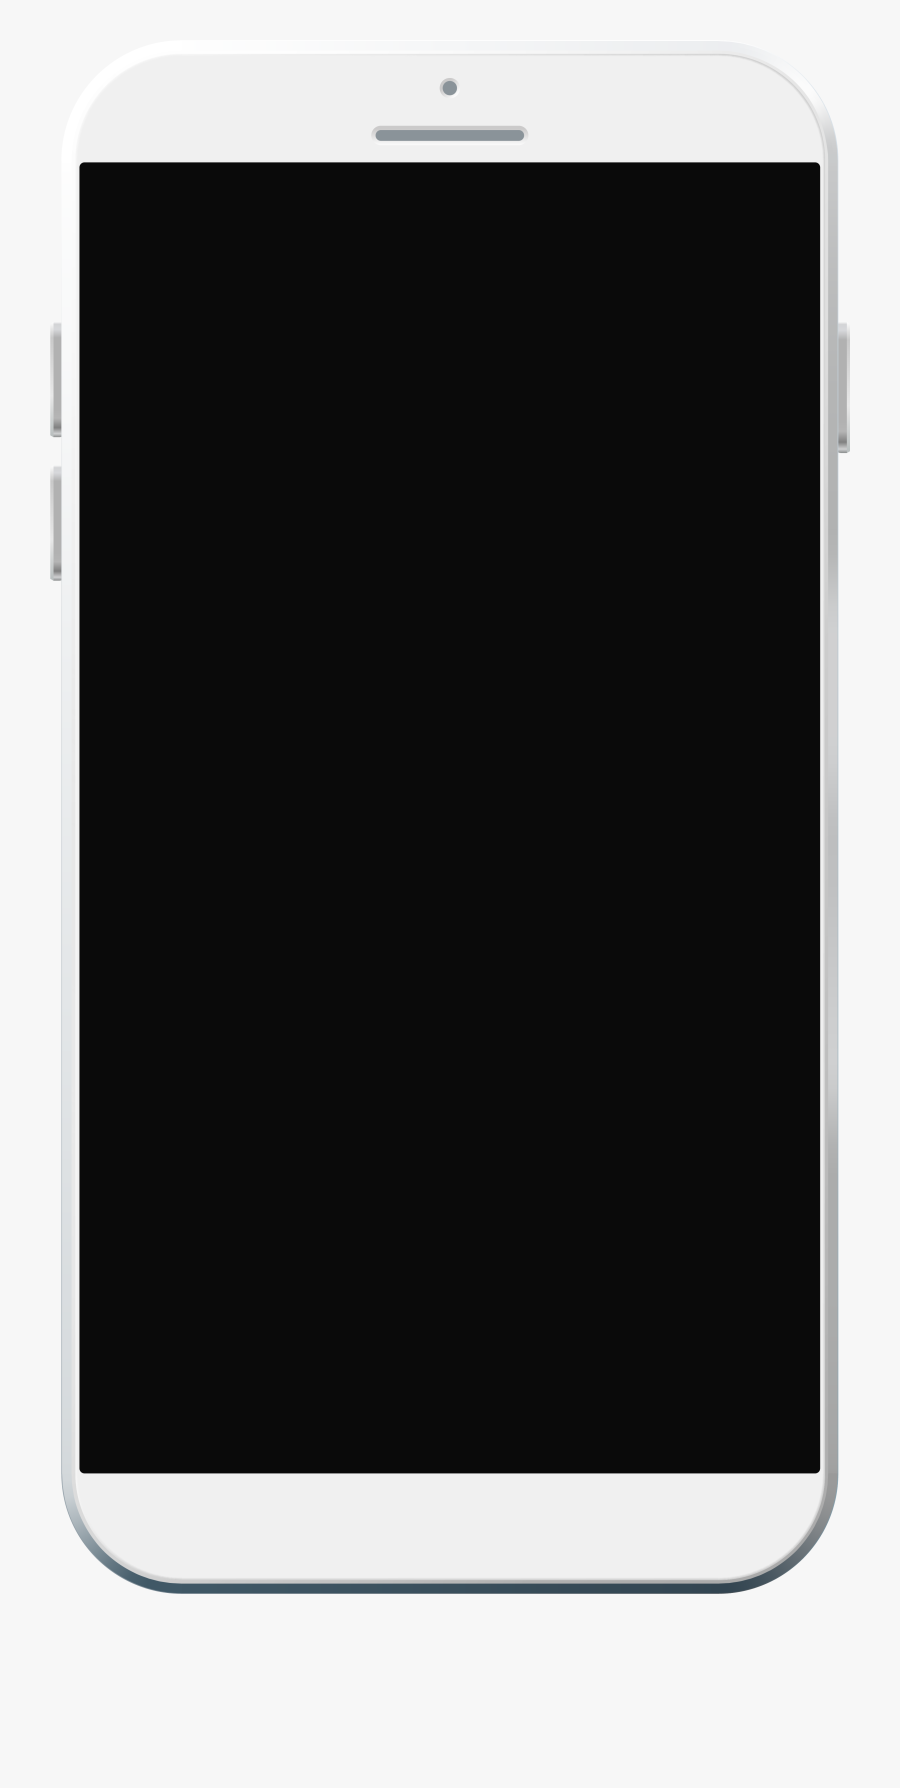 White Smartphone Png Clipart - Smartphone, Transparent Clipart